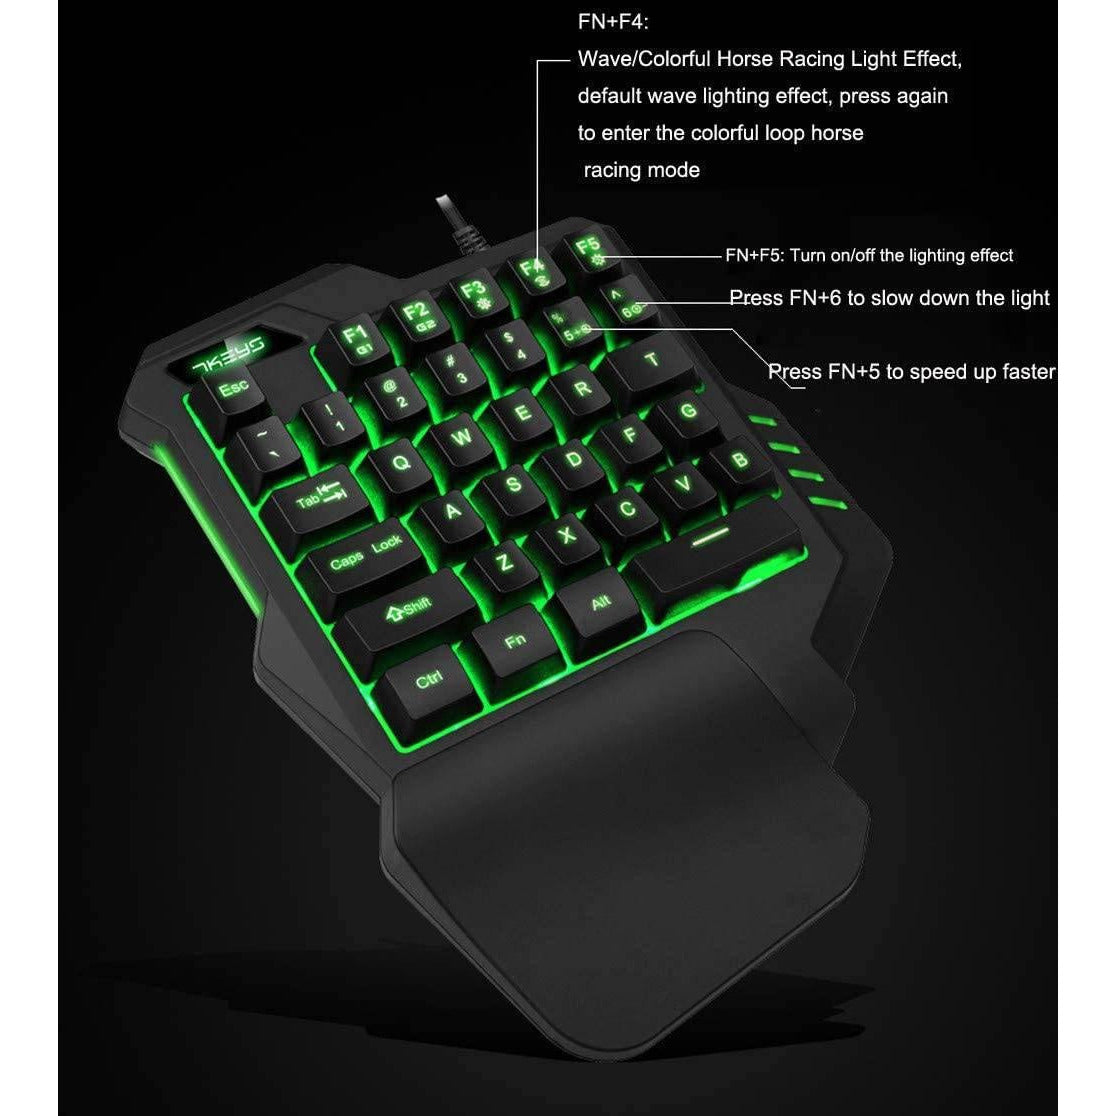 G30 Wired Gaming Keyboard with LED Backlight, Single Hand 35 Keys Membrane Keyboard for PUBG / Freefire / CF Mobile | Shopna Online Store .